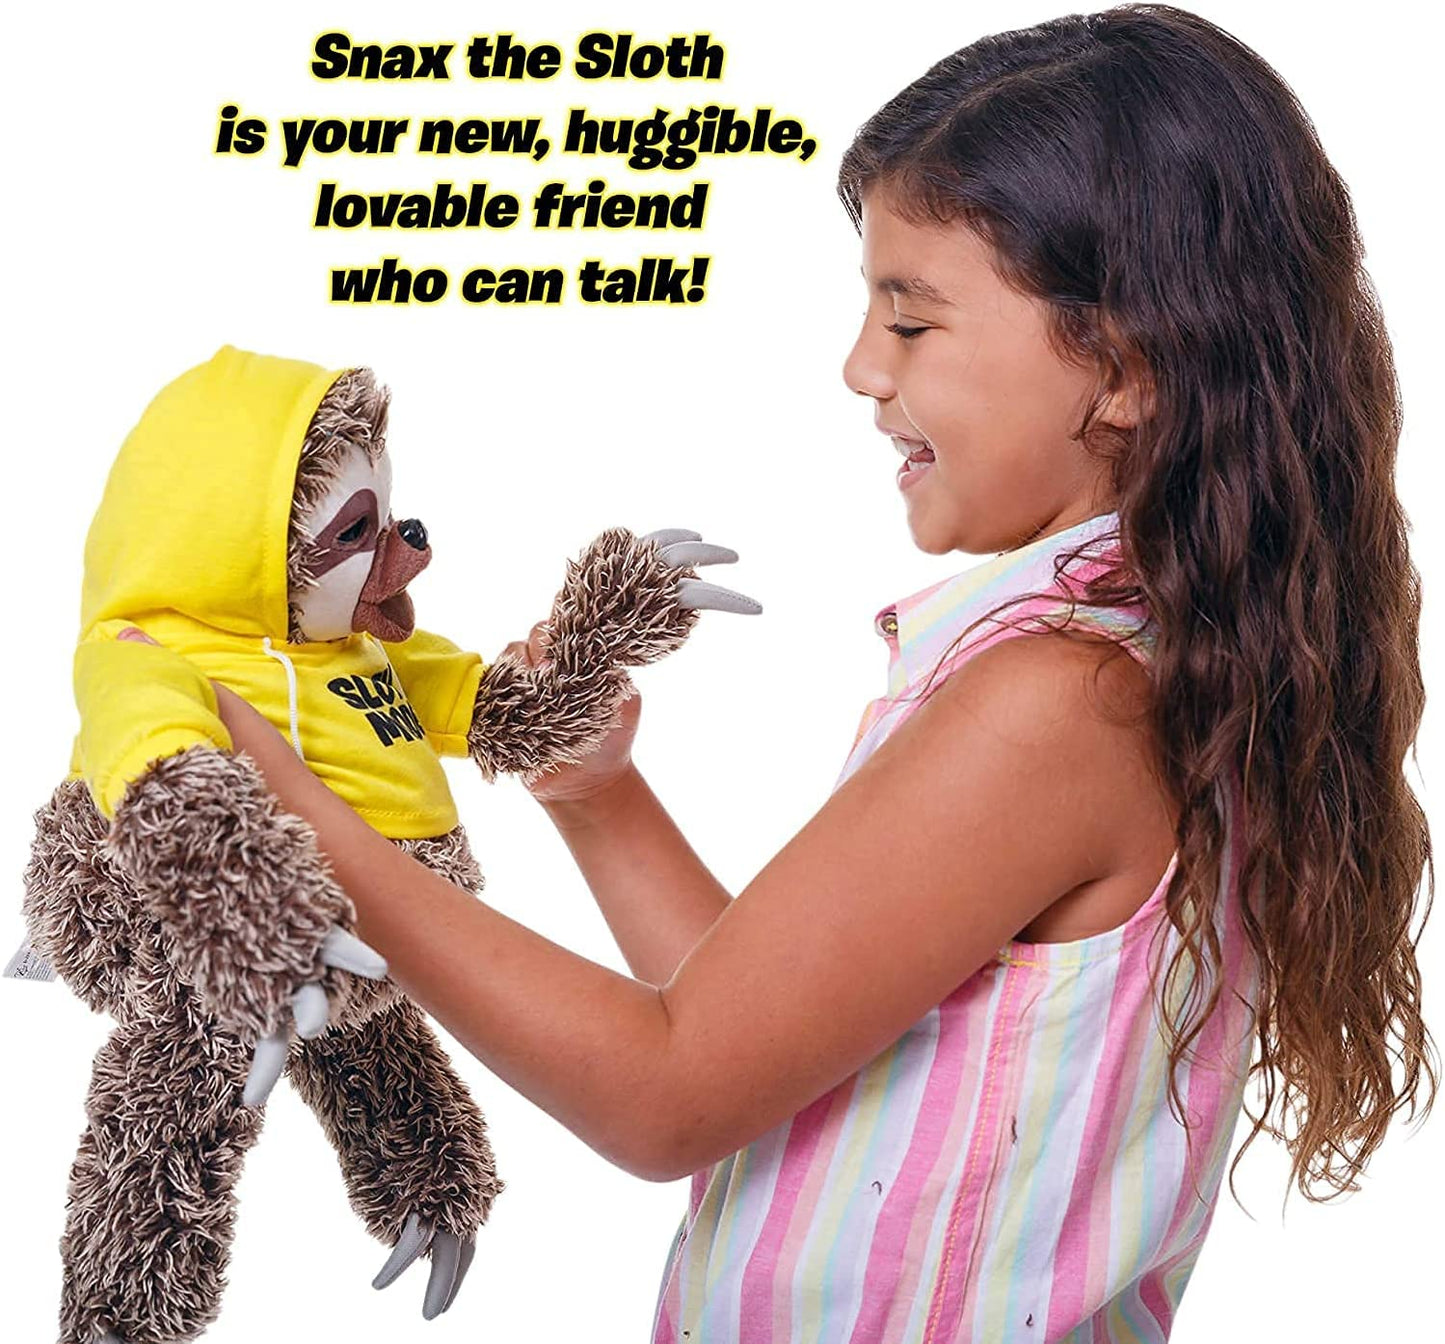 A child is holding a sloth plush toy. There is text which reads, 'Snax the sloth is your new, huggable, lovable friend who can talk.'